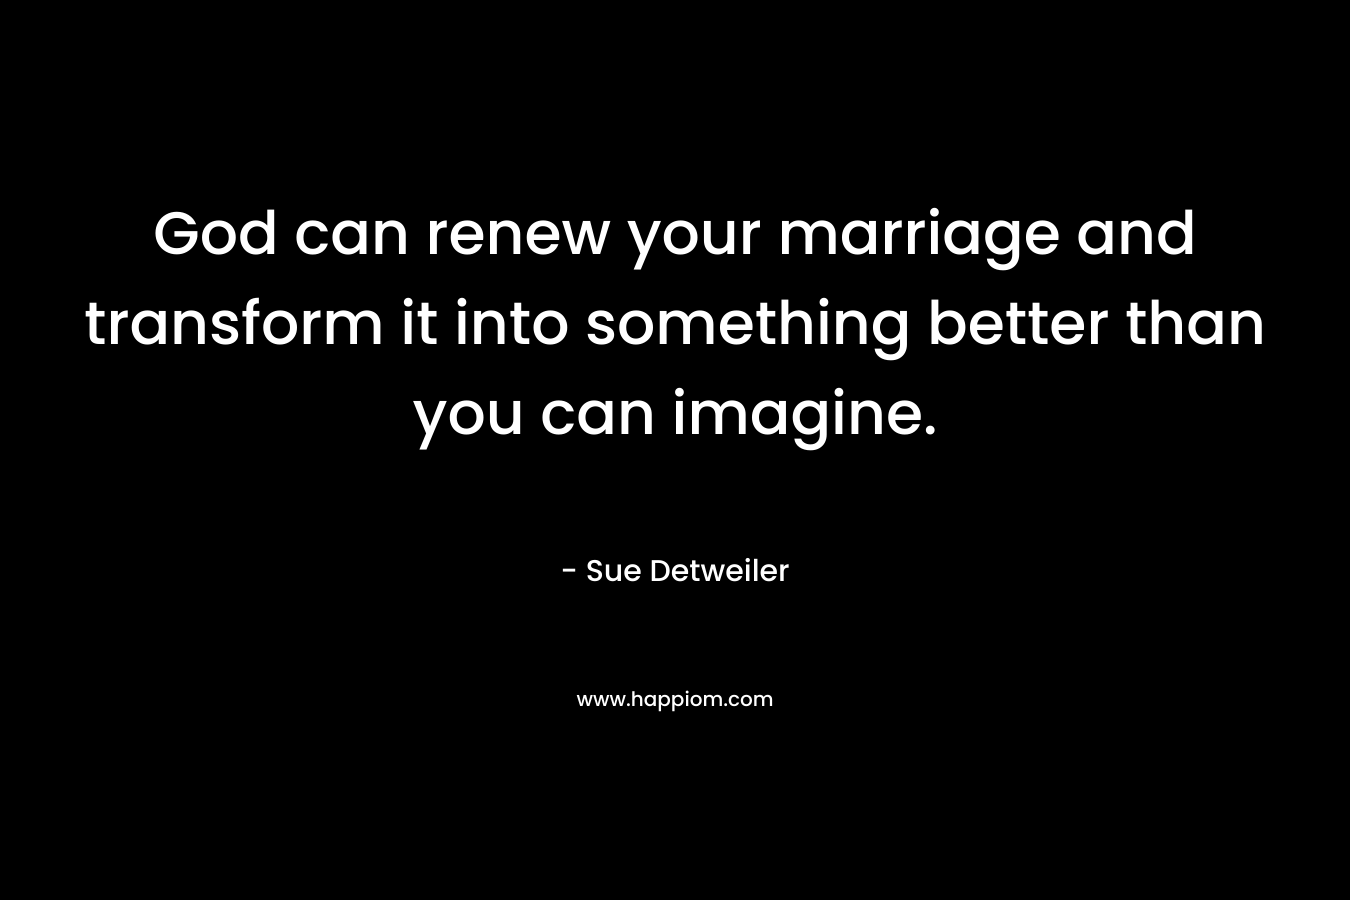 God can renew your marriage and transform it into something better than you can imagine.